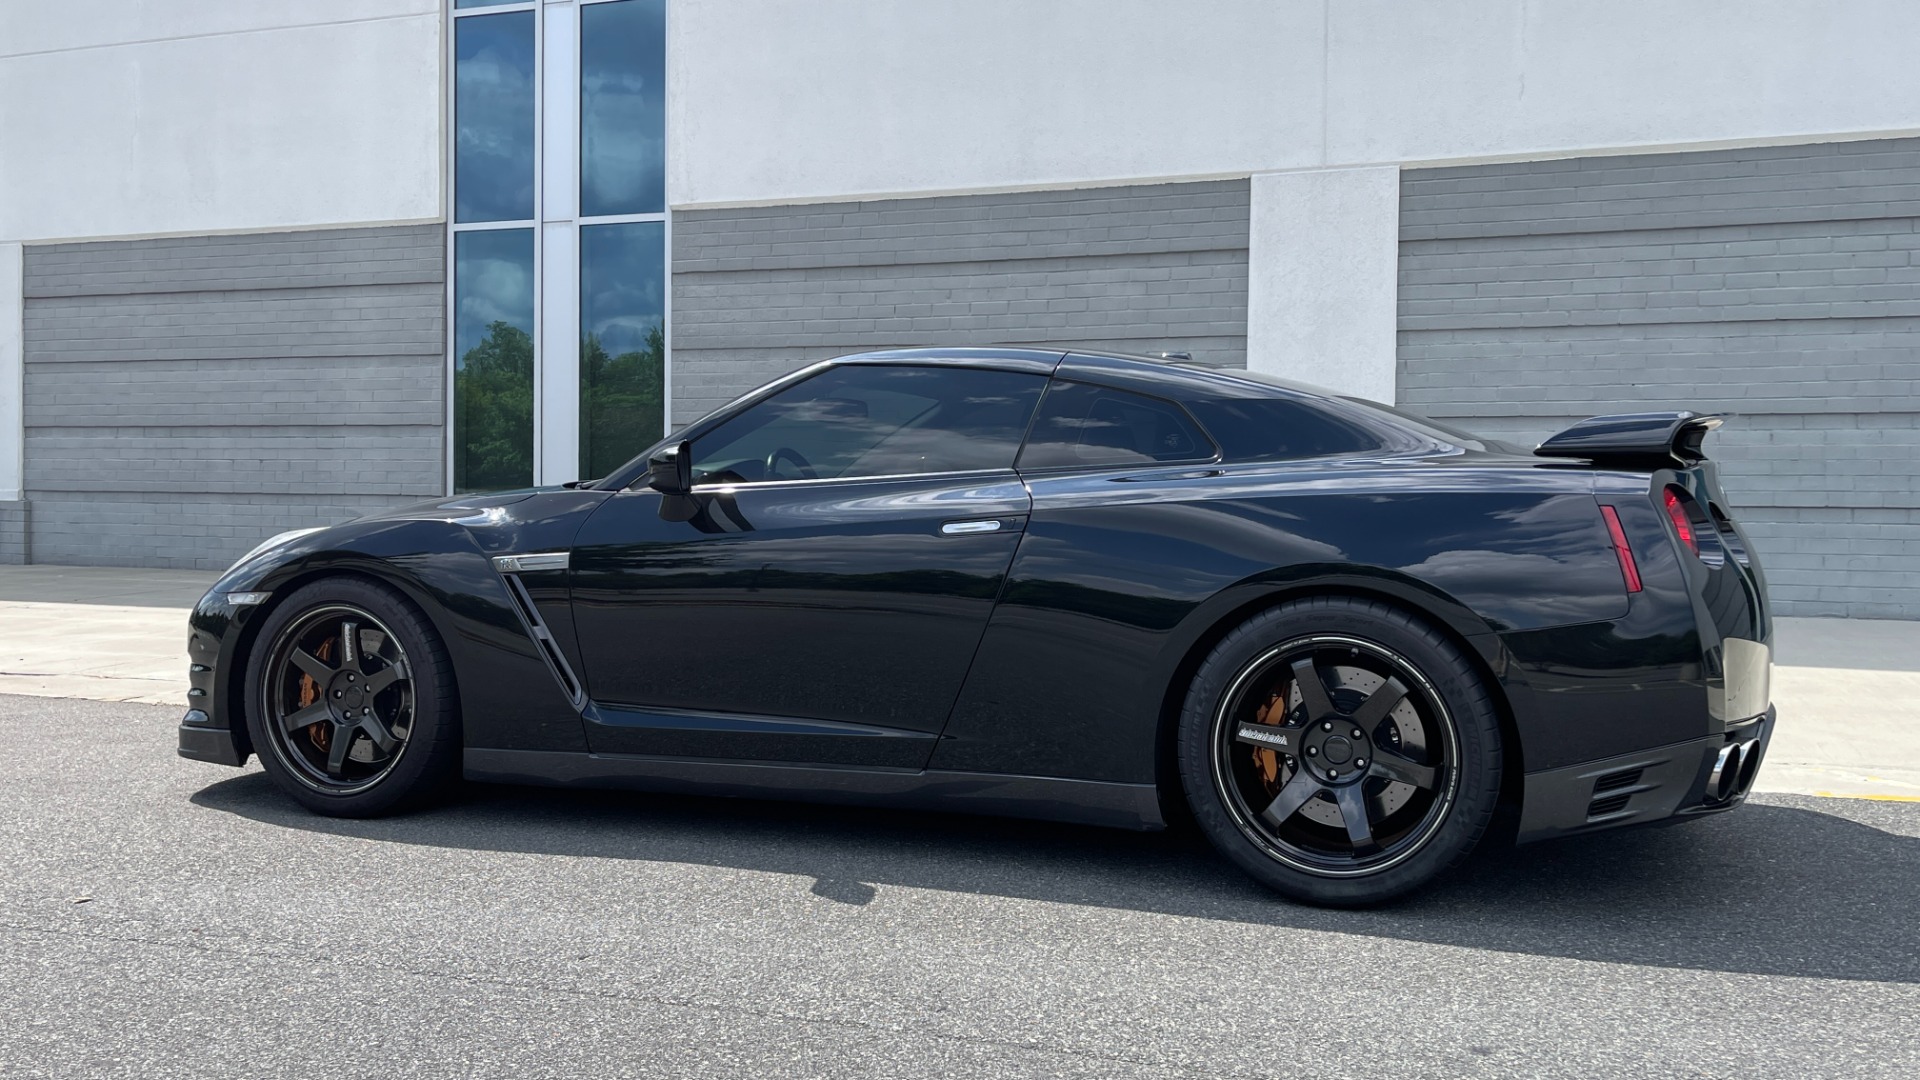 Used 2013 Nissan GT-R PREMIUM COUPE / 3.8L TWIN-TURBO / 6-SPD AUTO / COLD WTHR PKG / CAMERA for sale $75,995 at Formula Imports in Charlotte NC 28227 5